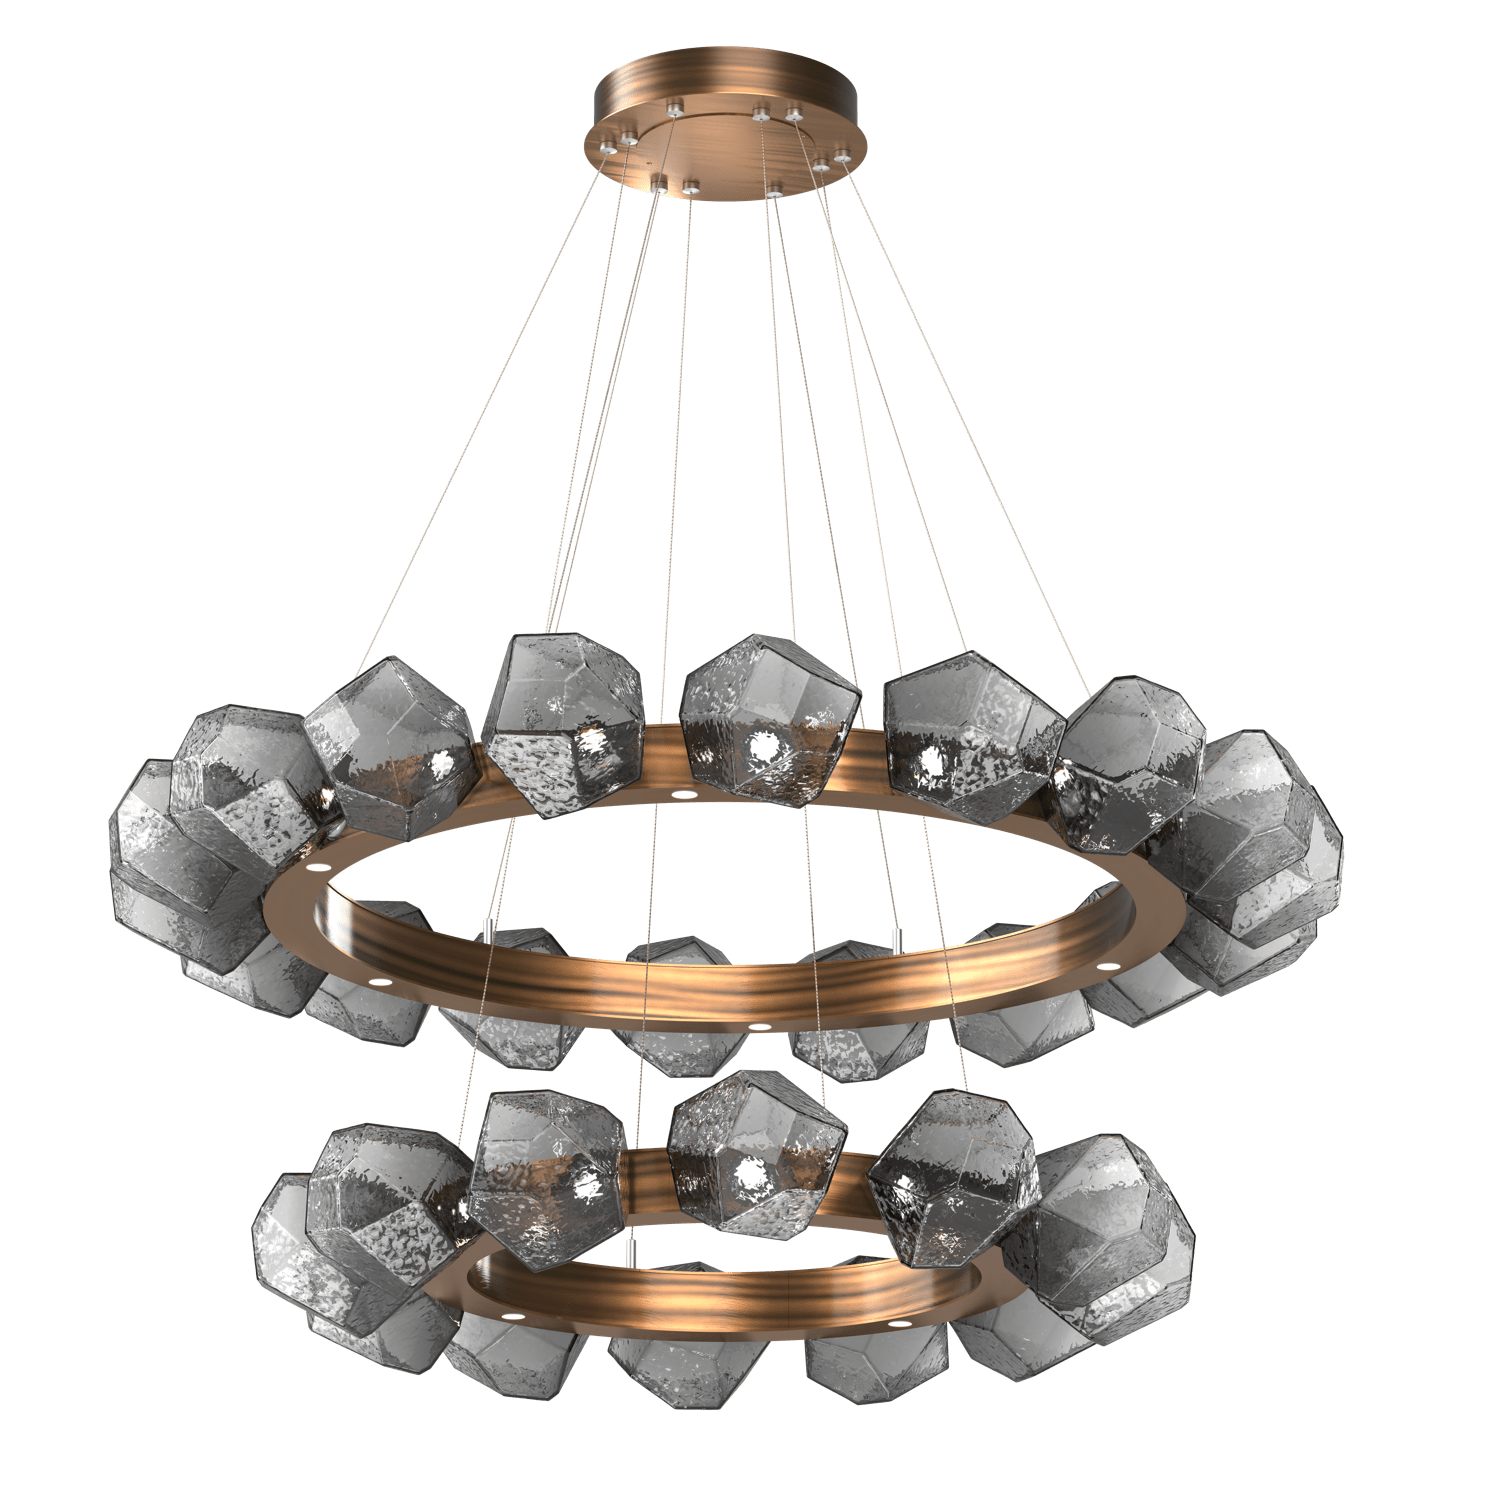 CHB0039-2T-RB-S-Hammerton-Studio-Gem-48-inch-two-tier-radial-ring-chandelier-with-oil-rubbed-bronze-finish-and-smoke-blown-glass-shades-and-LED-lamping